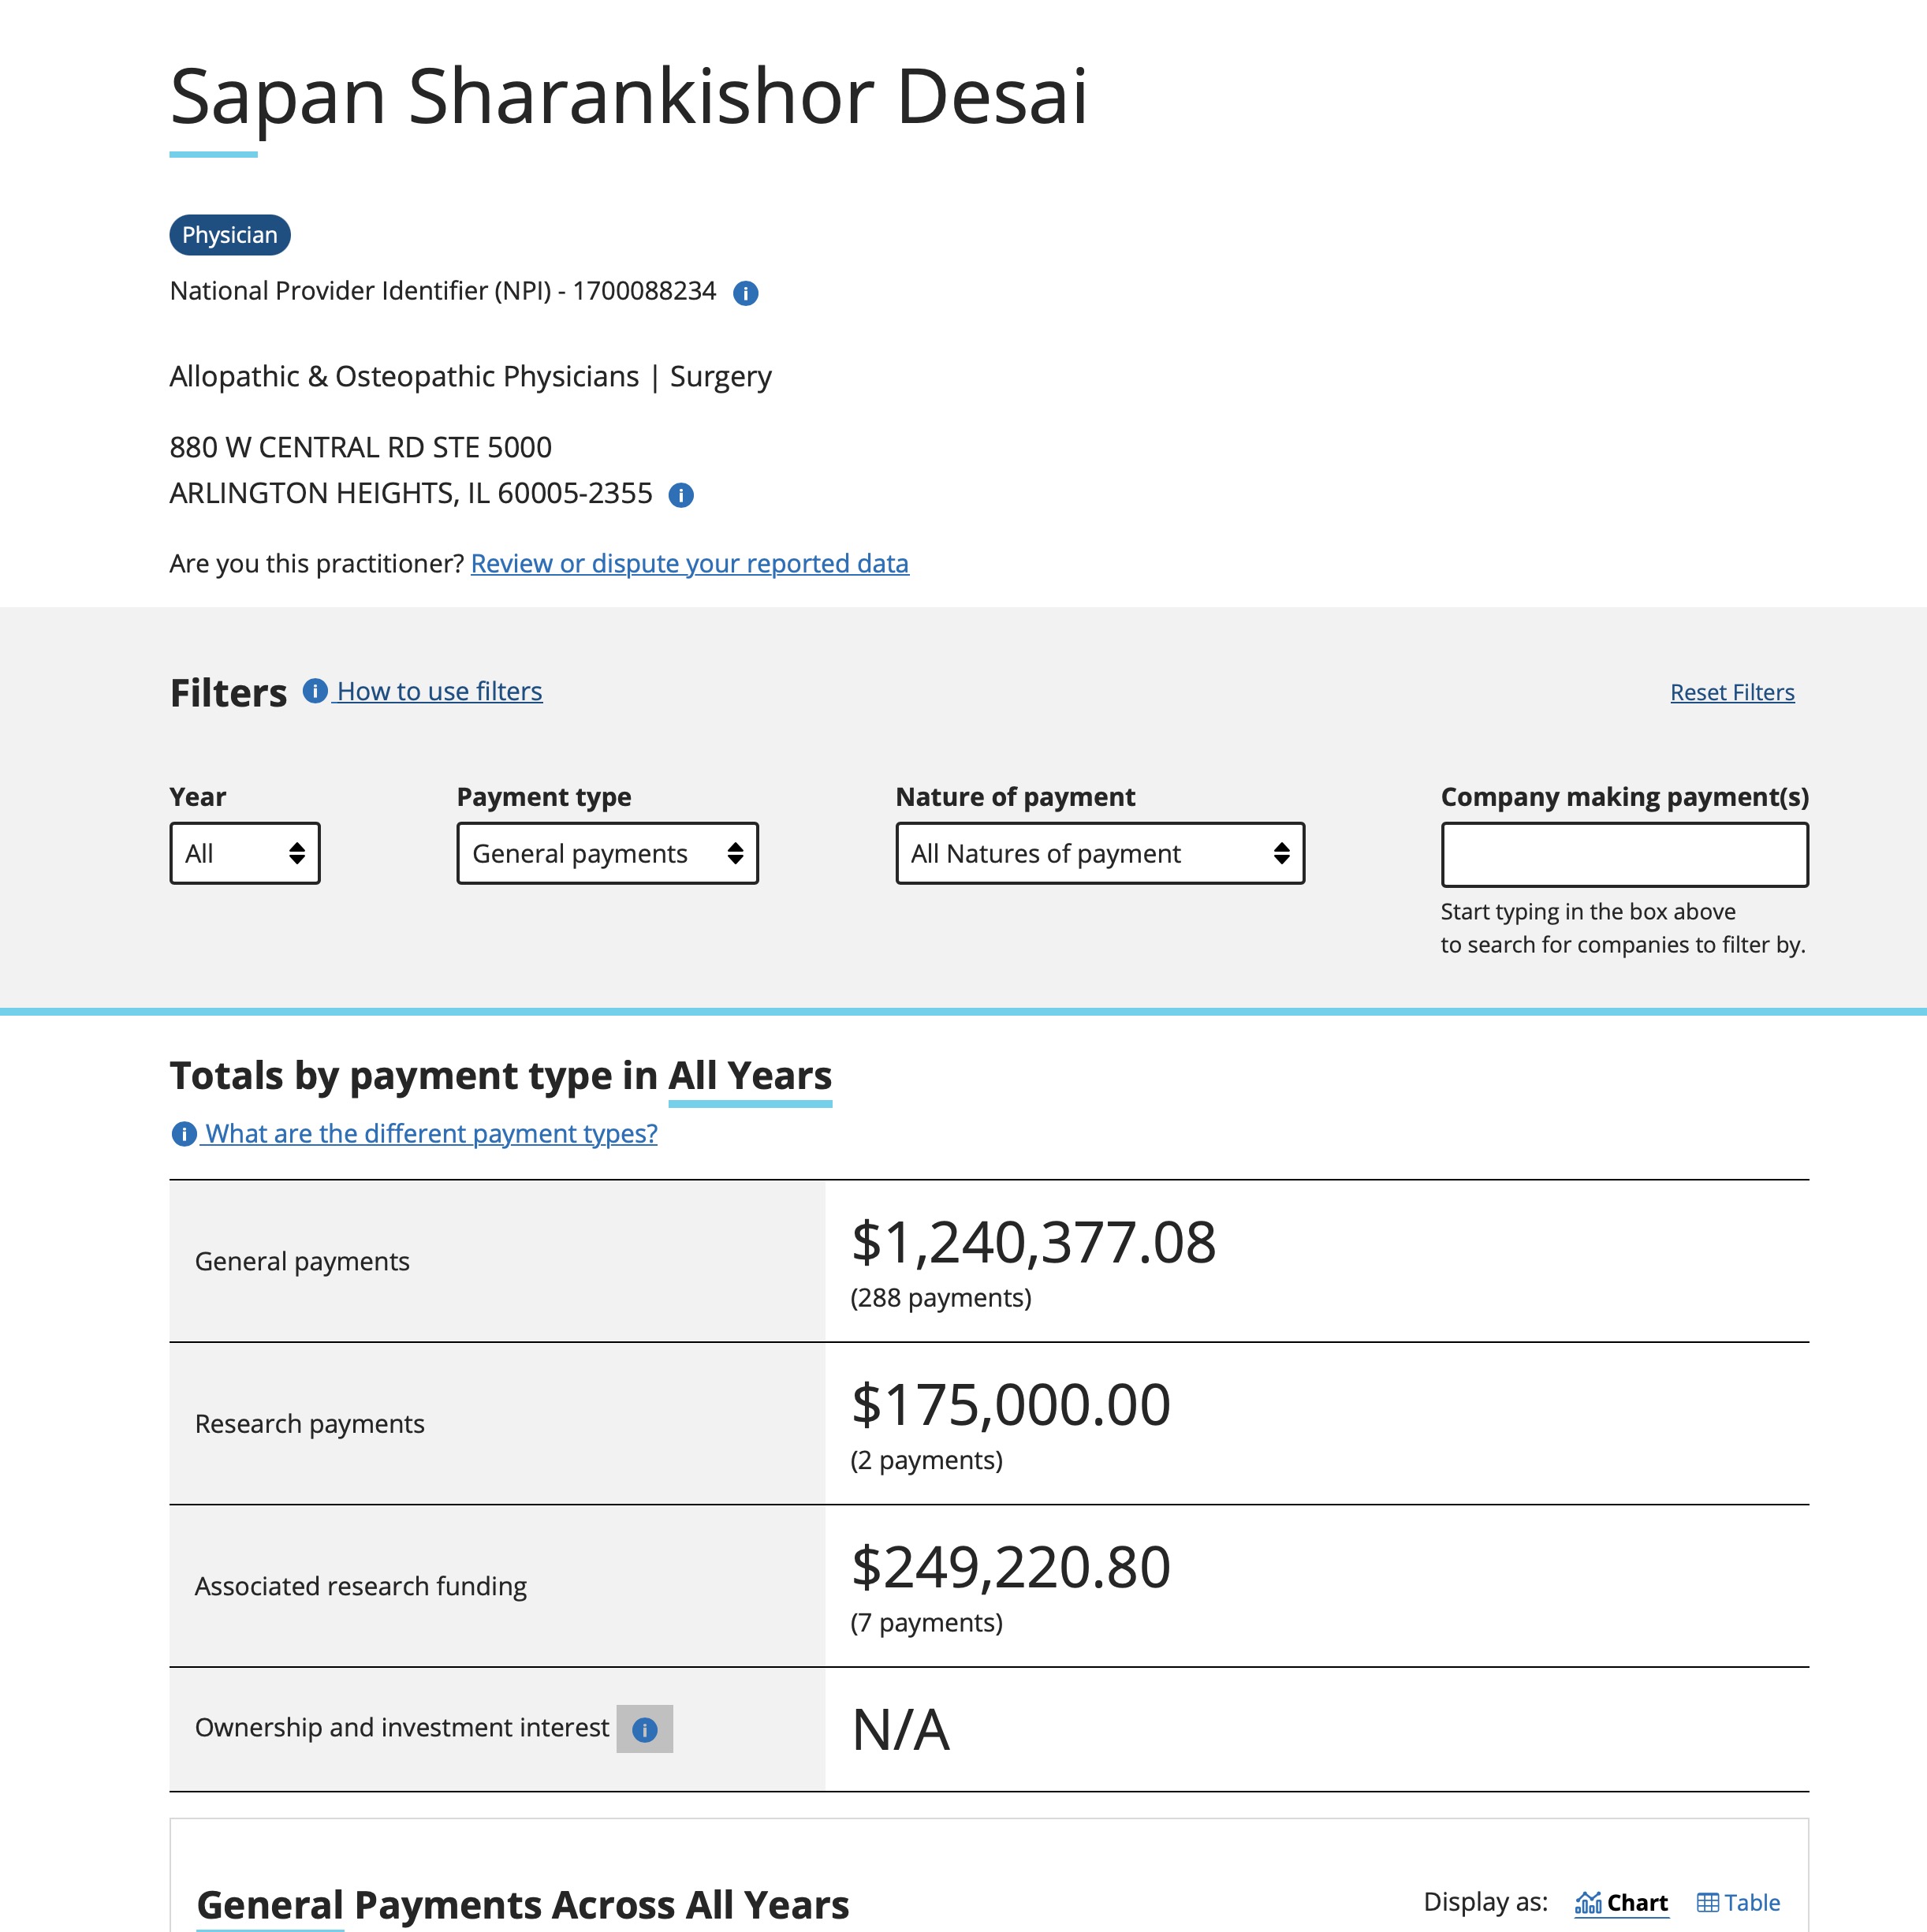 Sapan Desai's Payments from Pharma and Medical Devices / Research